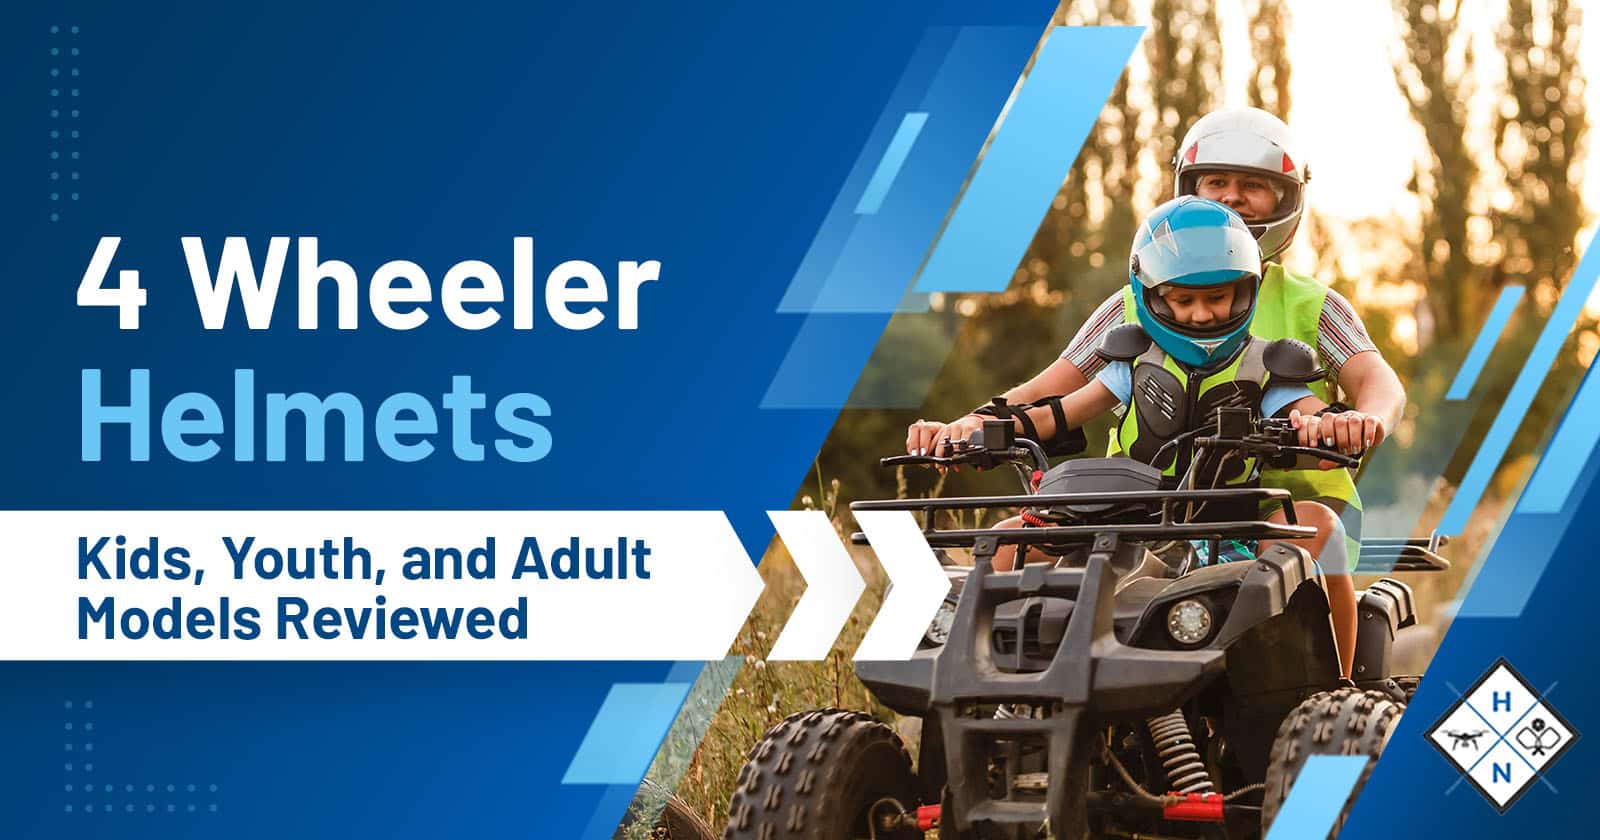 4-Wheeler Helmets – Kids, Youth, and Adult Models Reviewed